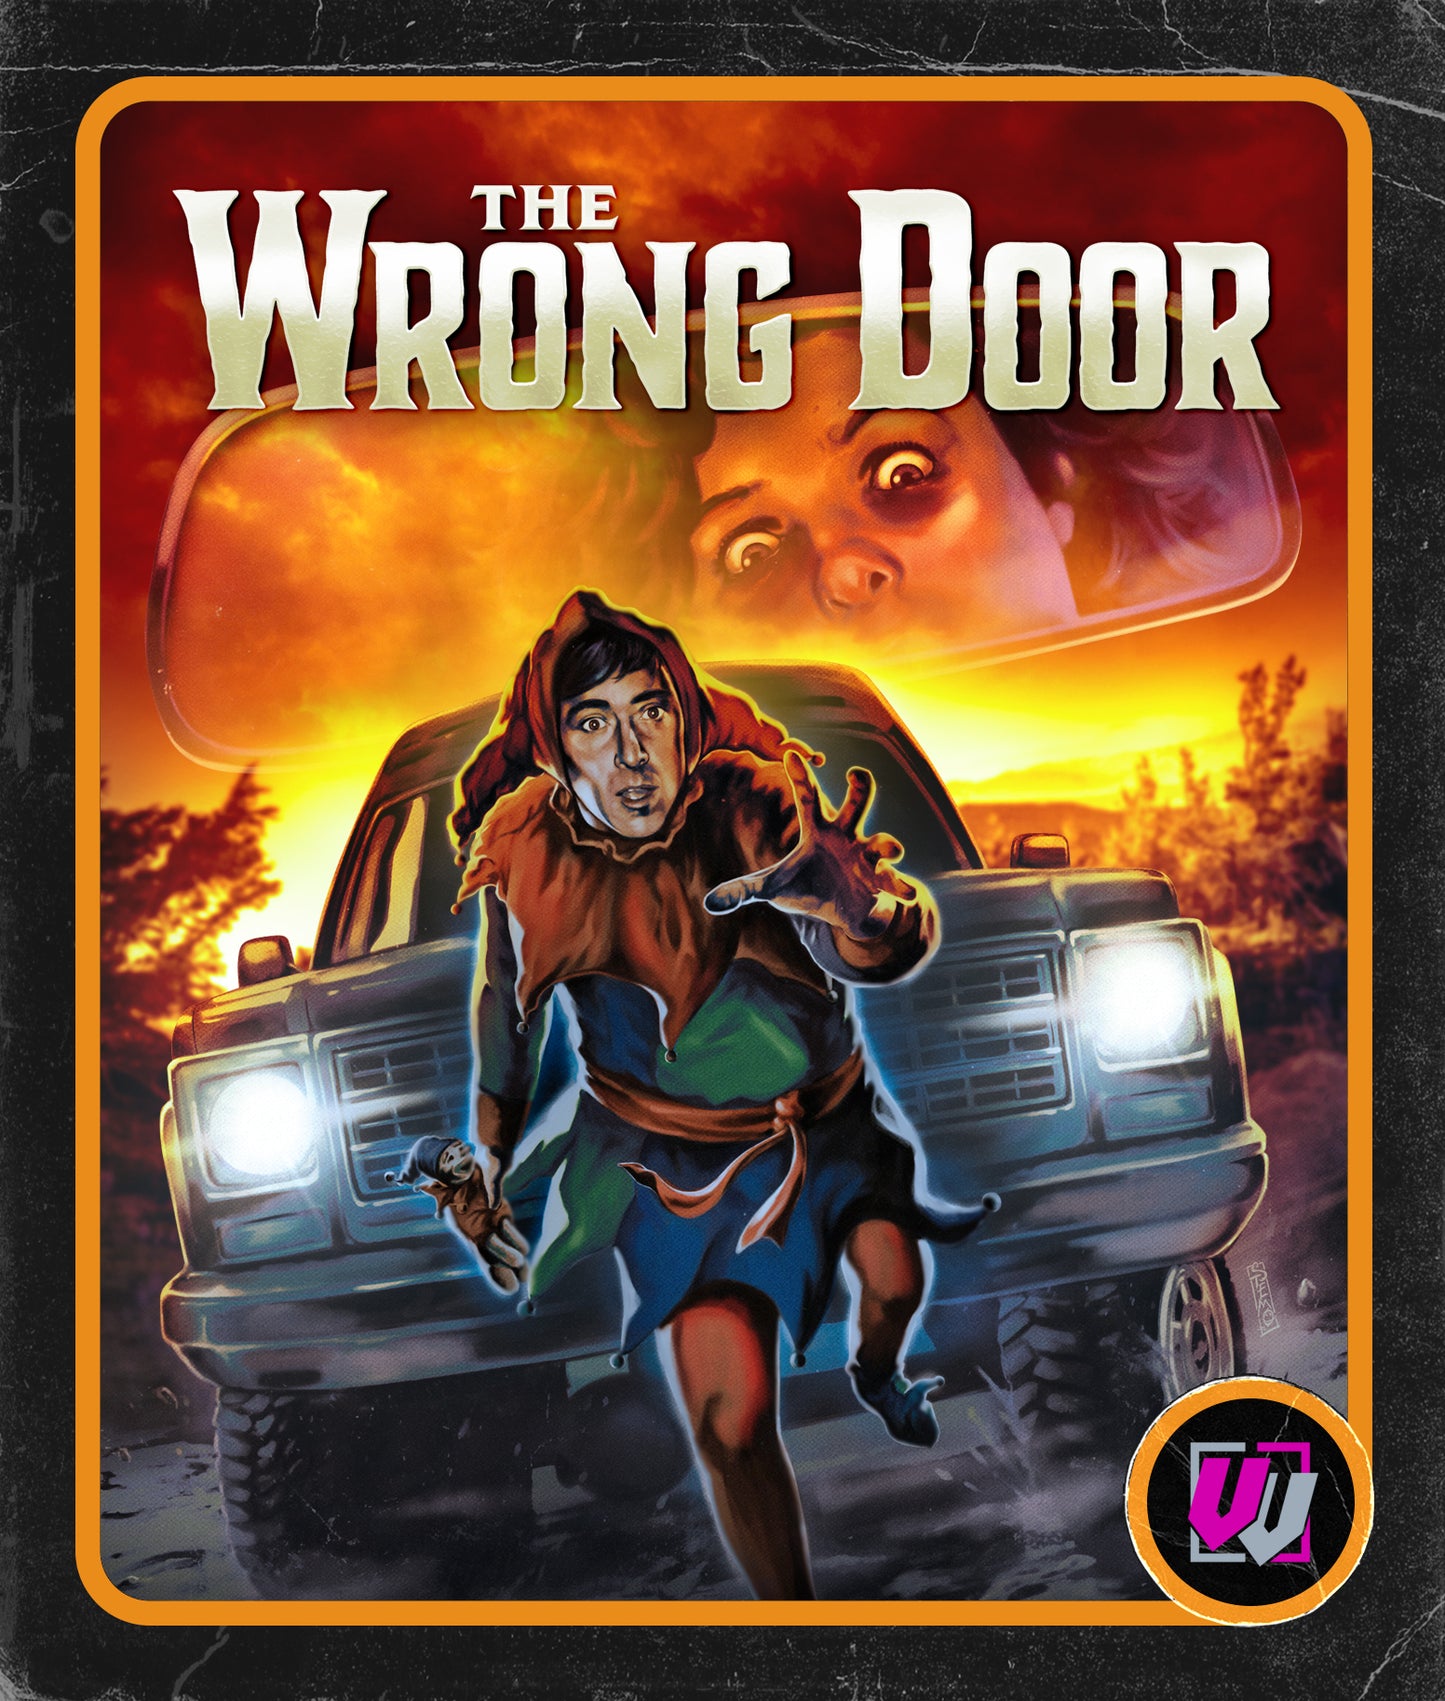 The Wrong Door Limited Edition Visual Vengeance Blu-Ray [NEW] [SLIPCOVER]